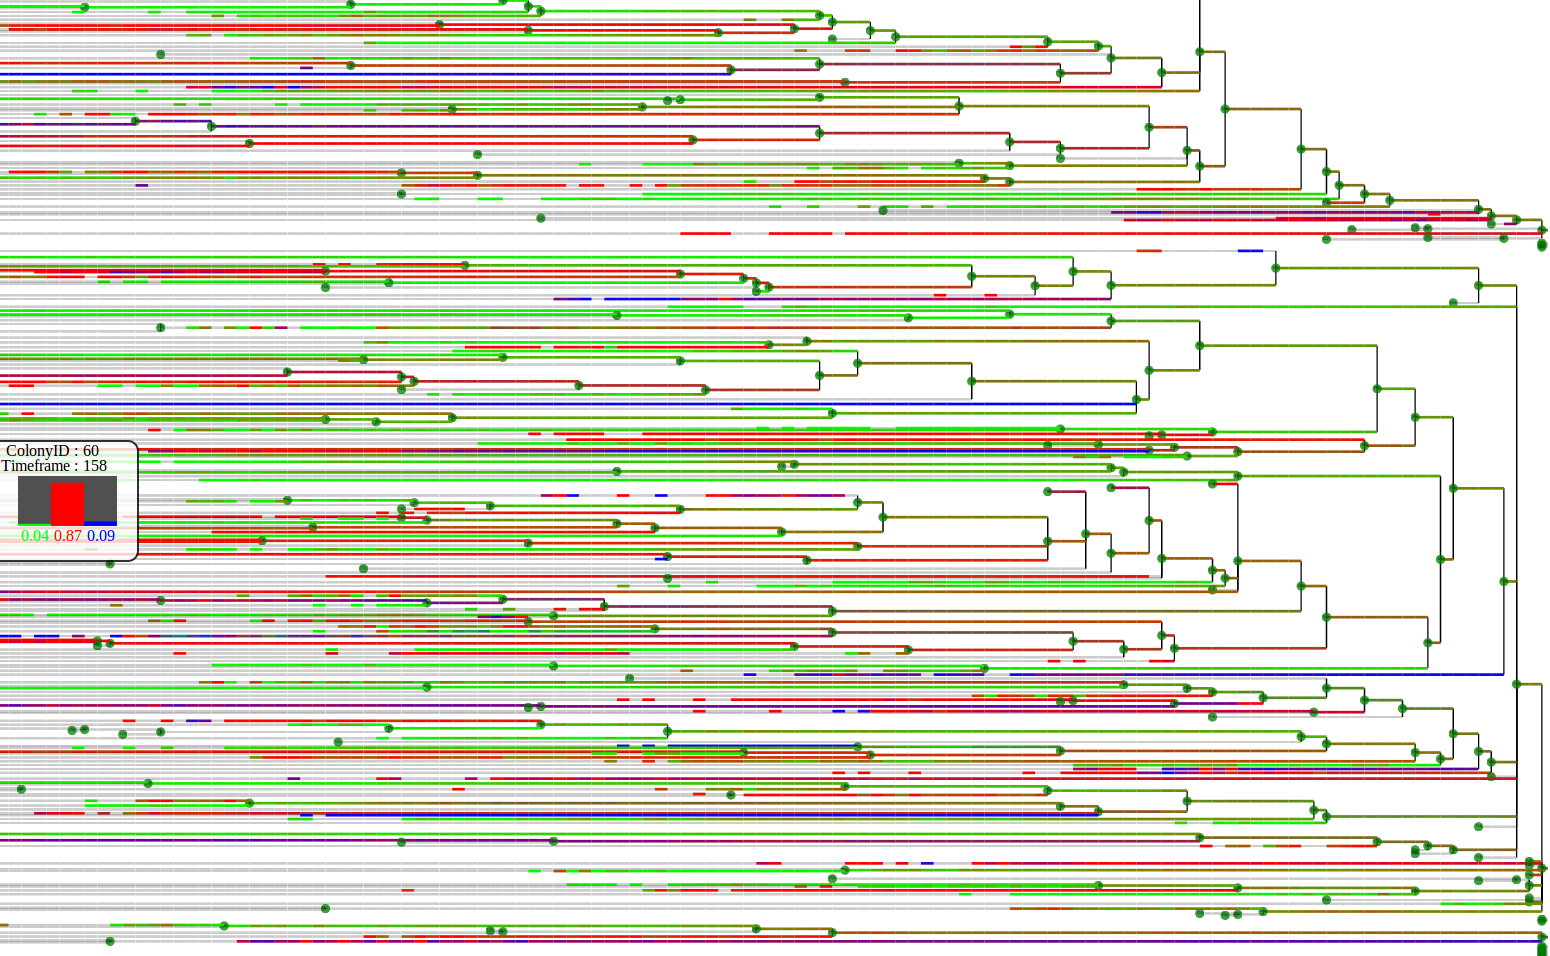 The augmented lineage tree visualisation